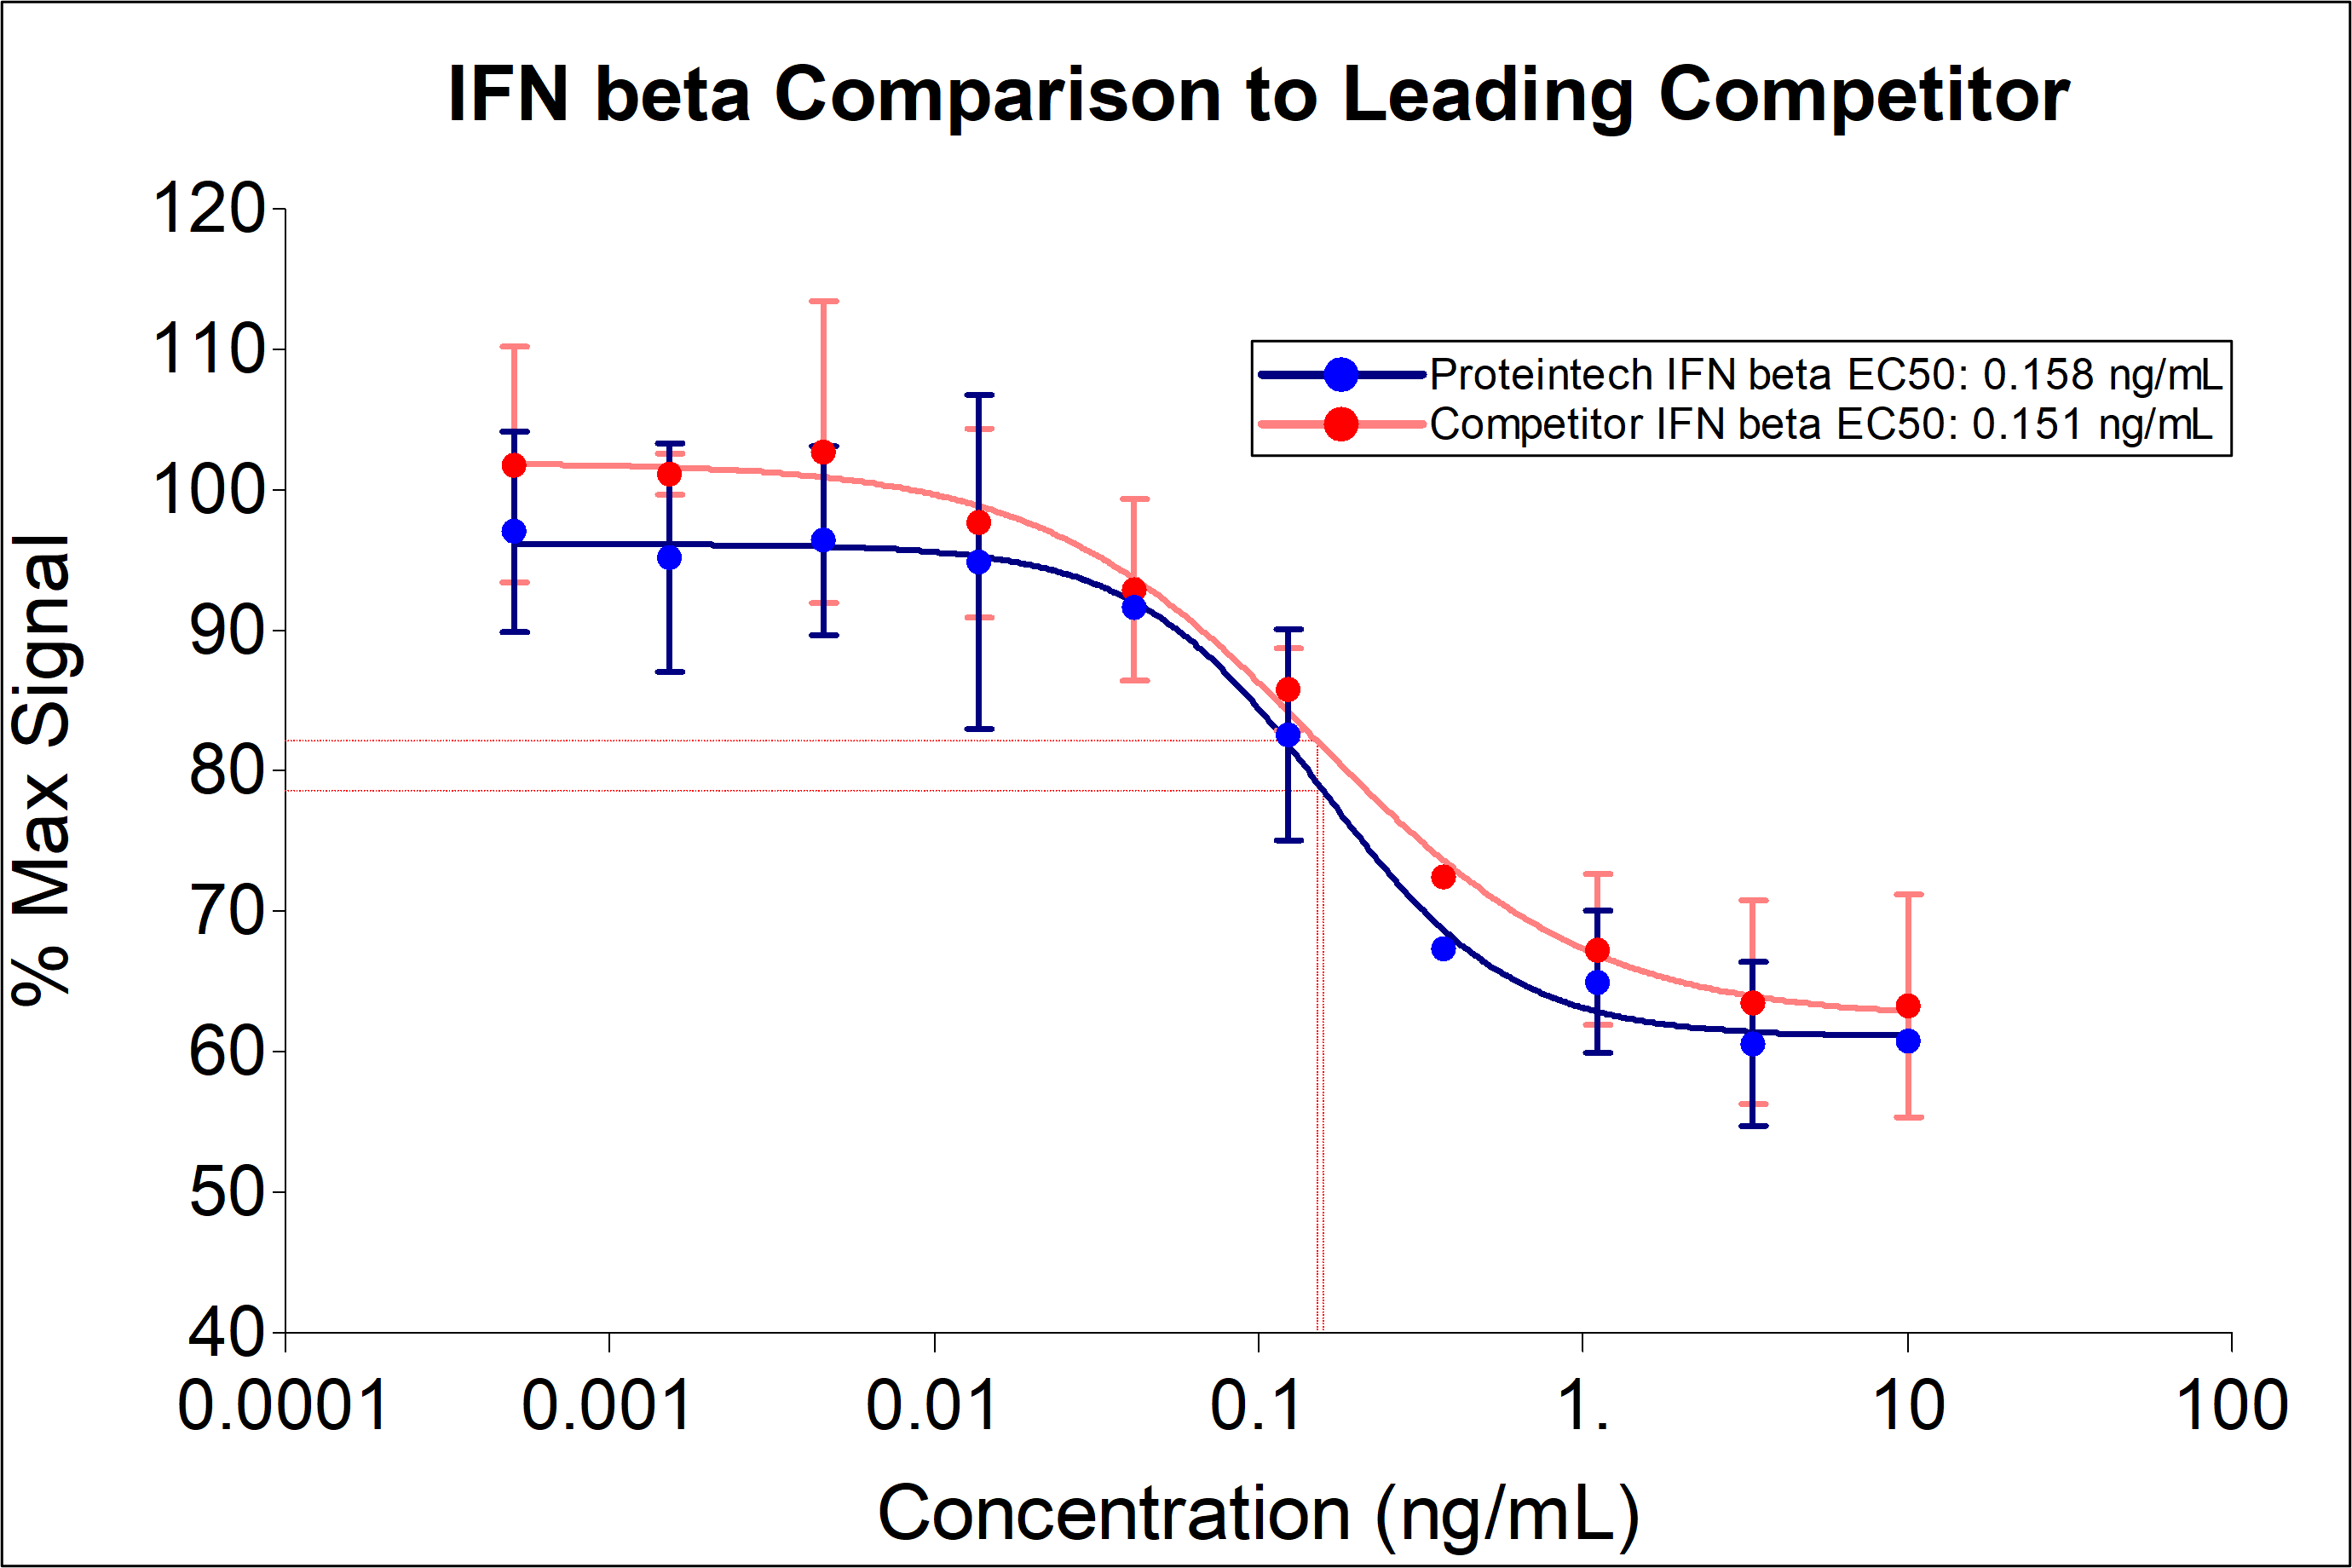 Proteintech IFN beta demonstrates equivalent induction of proliferation and EC50 to leading competitors. IFN beta dose-dependently inhibits growth of the TF-1 cell line. Cell number was quantitatively assessed by PrestoBlue® Cell Viability Reagent. TF-1 cells were treated with increasing concentrations of recombinant IFN beta for 72 hours. The EC50 was determined using a 4-parameter non-linear regression model. The EC50 range is 0.015-0.08 ng/mL​.